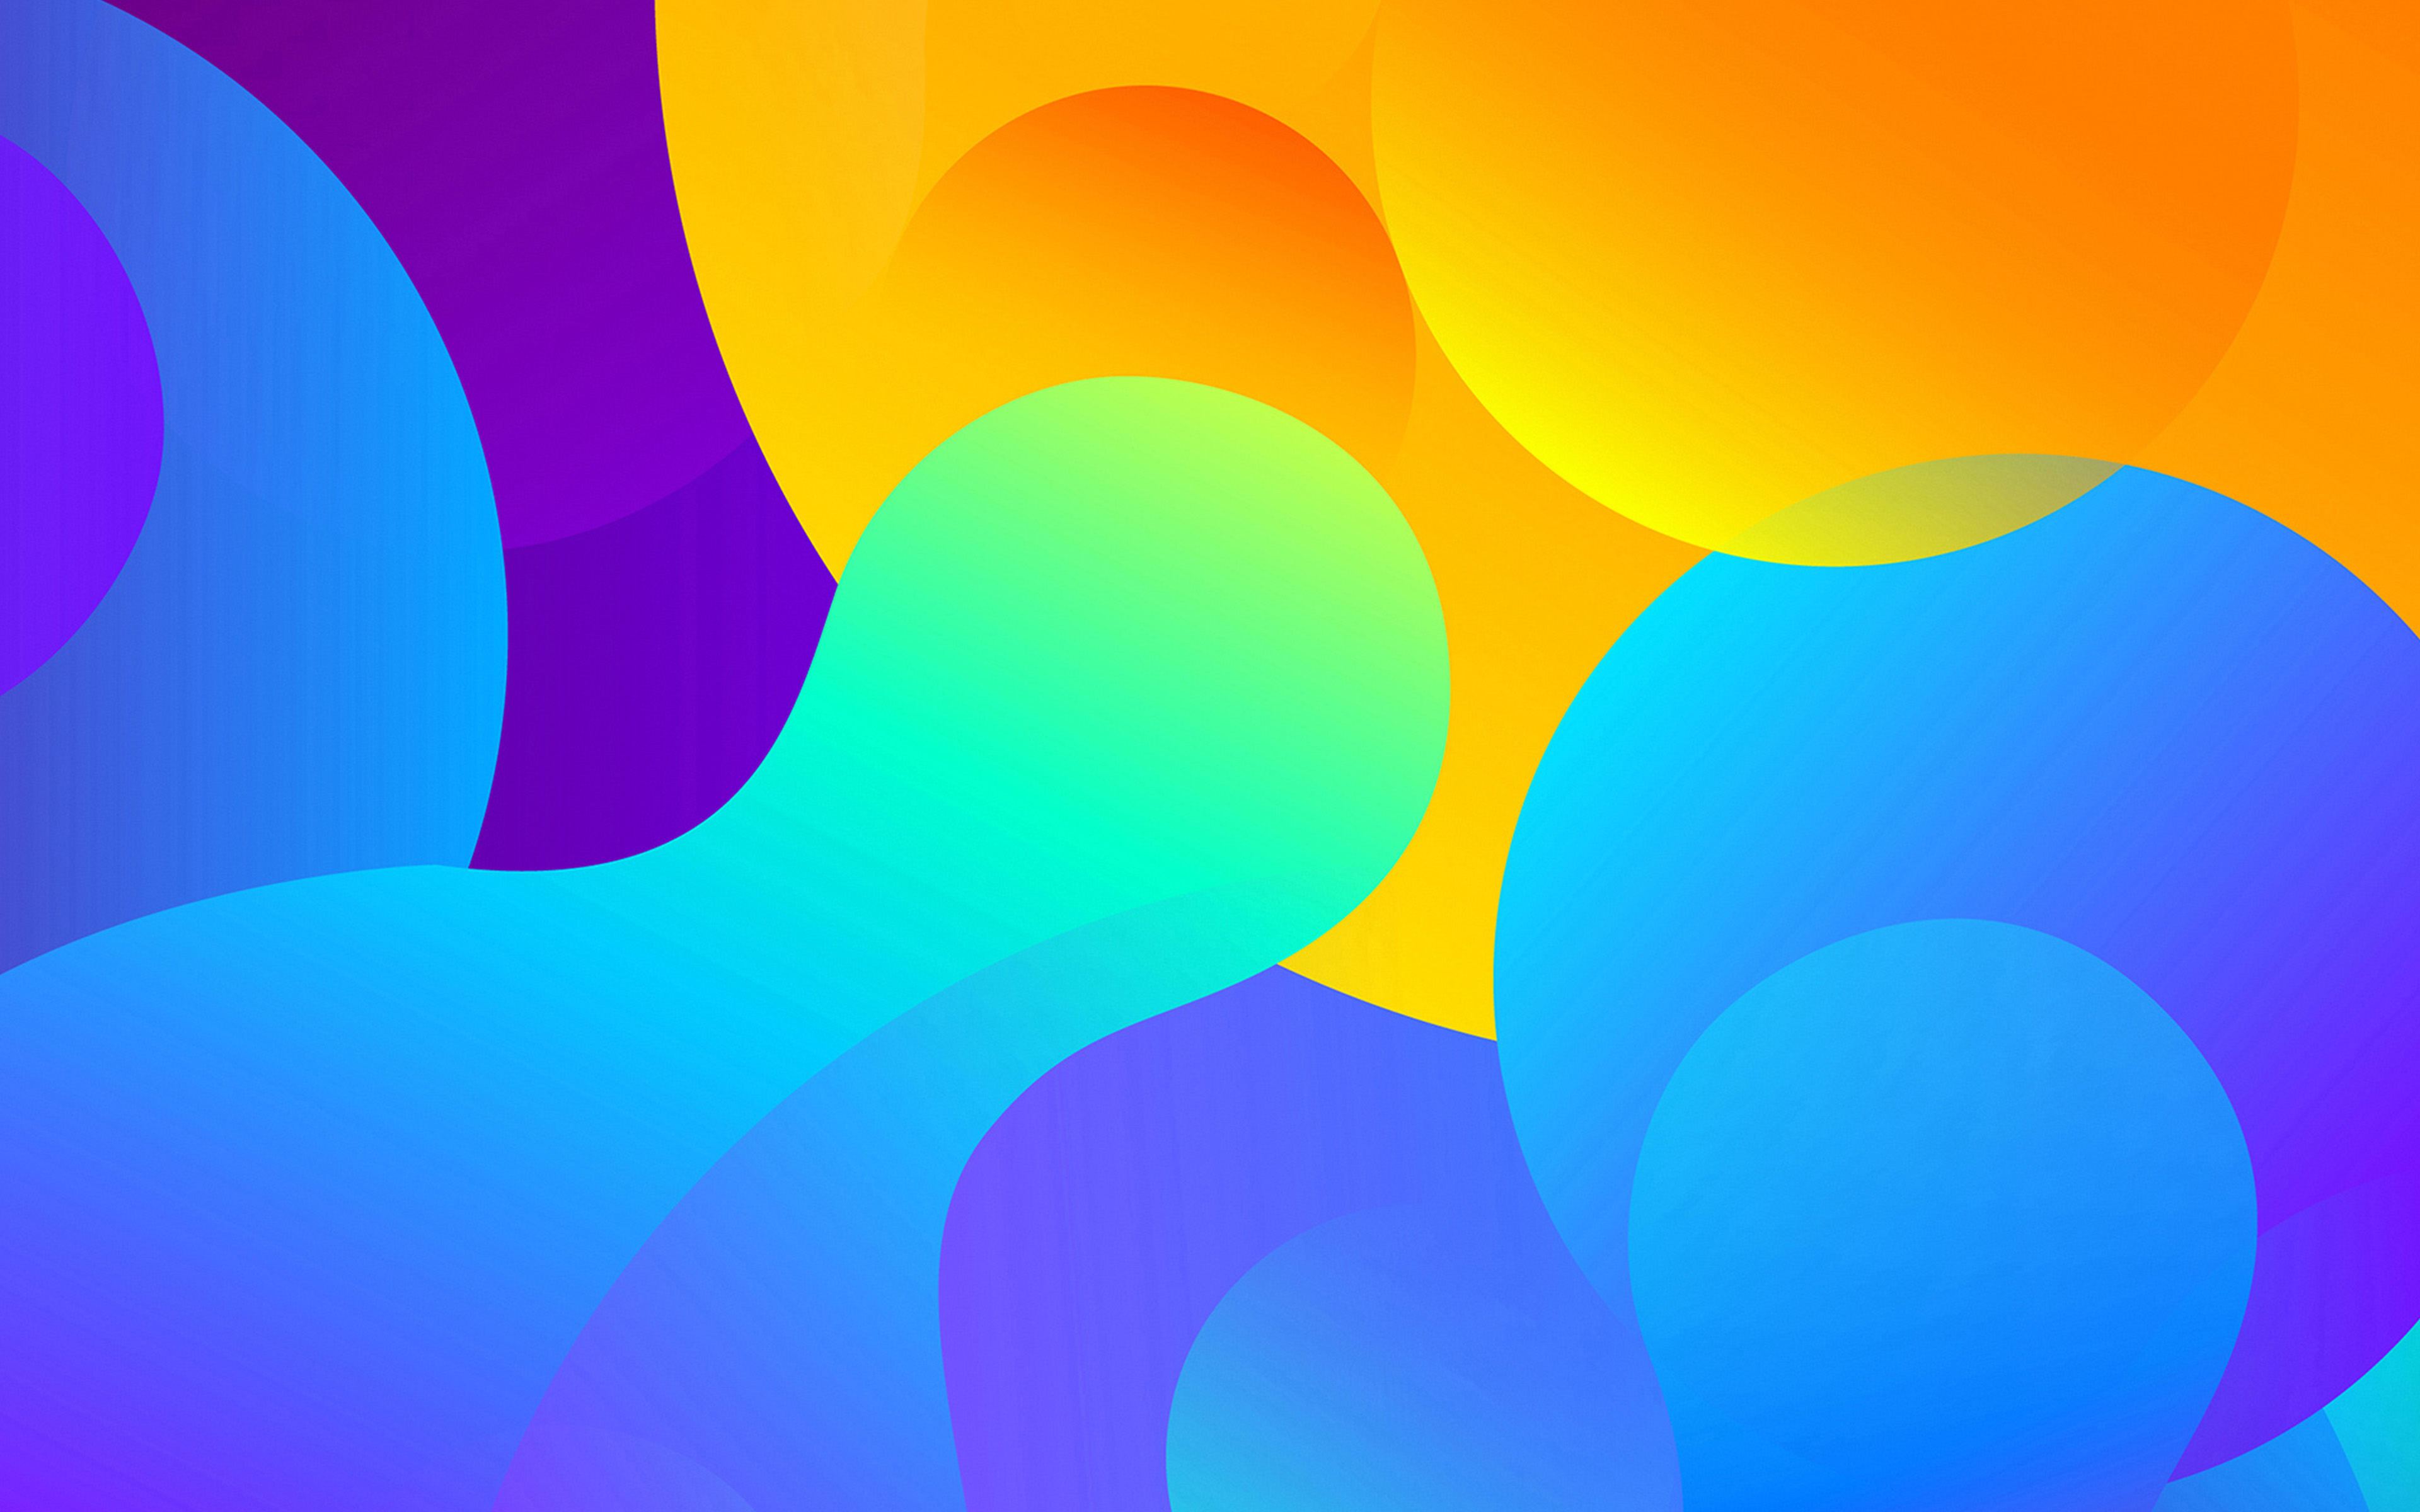 Download wallpapers 4k, material design, abstrac liquid patterns ...